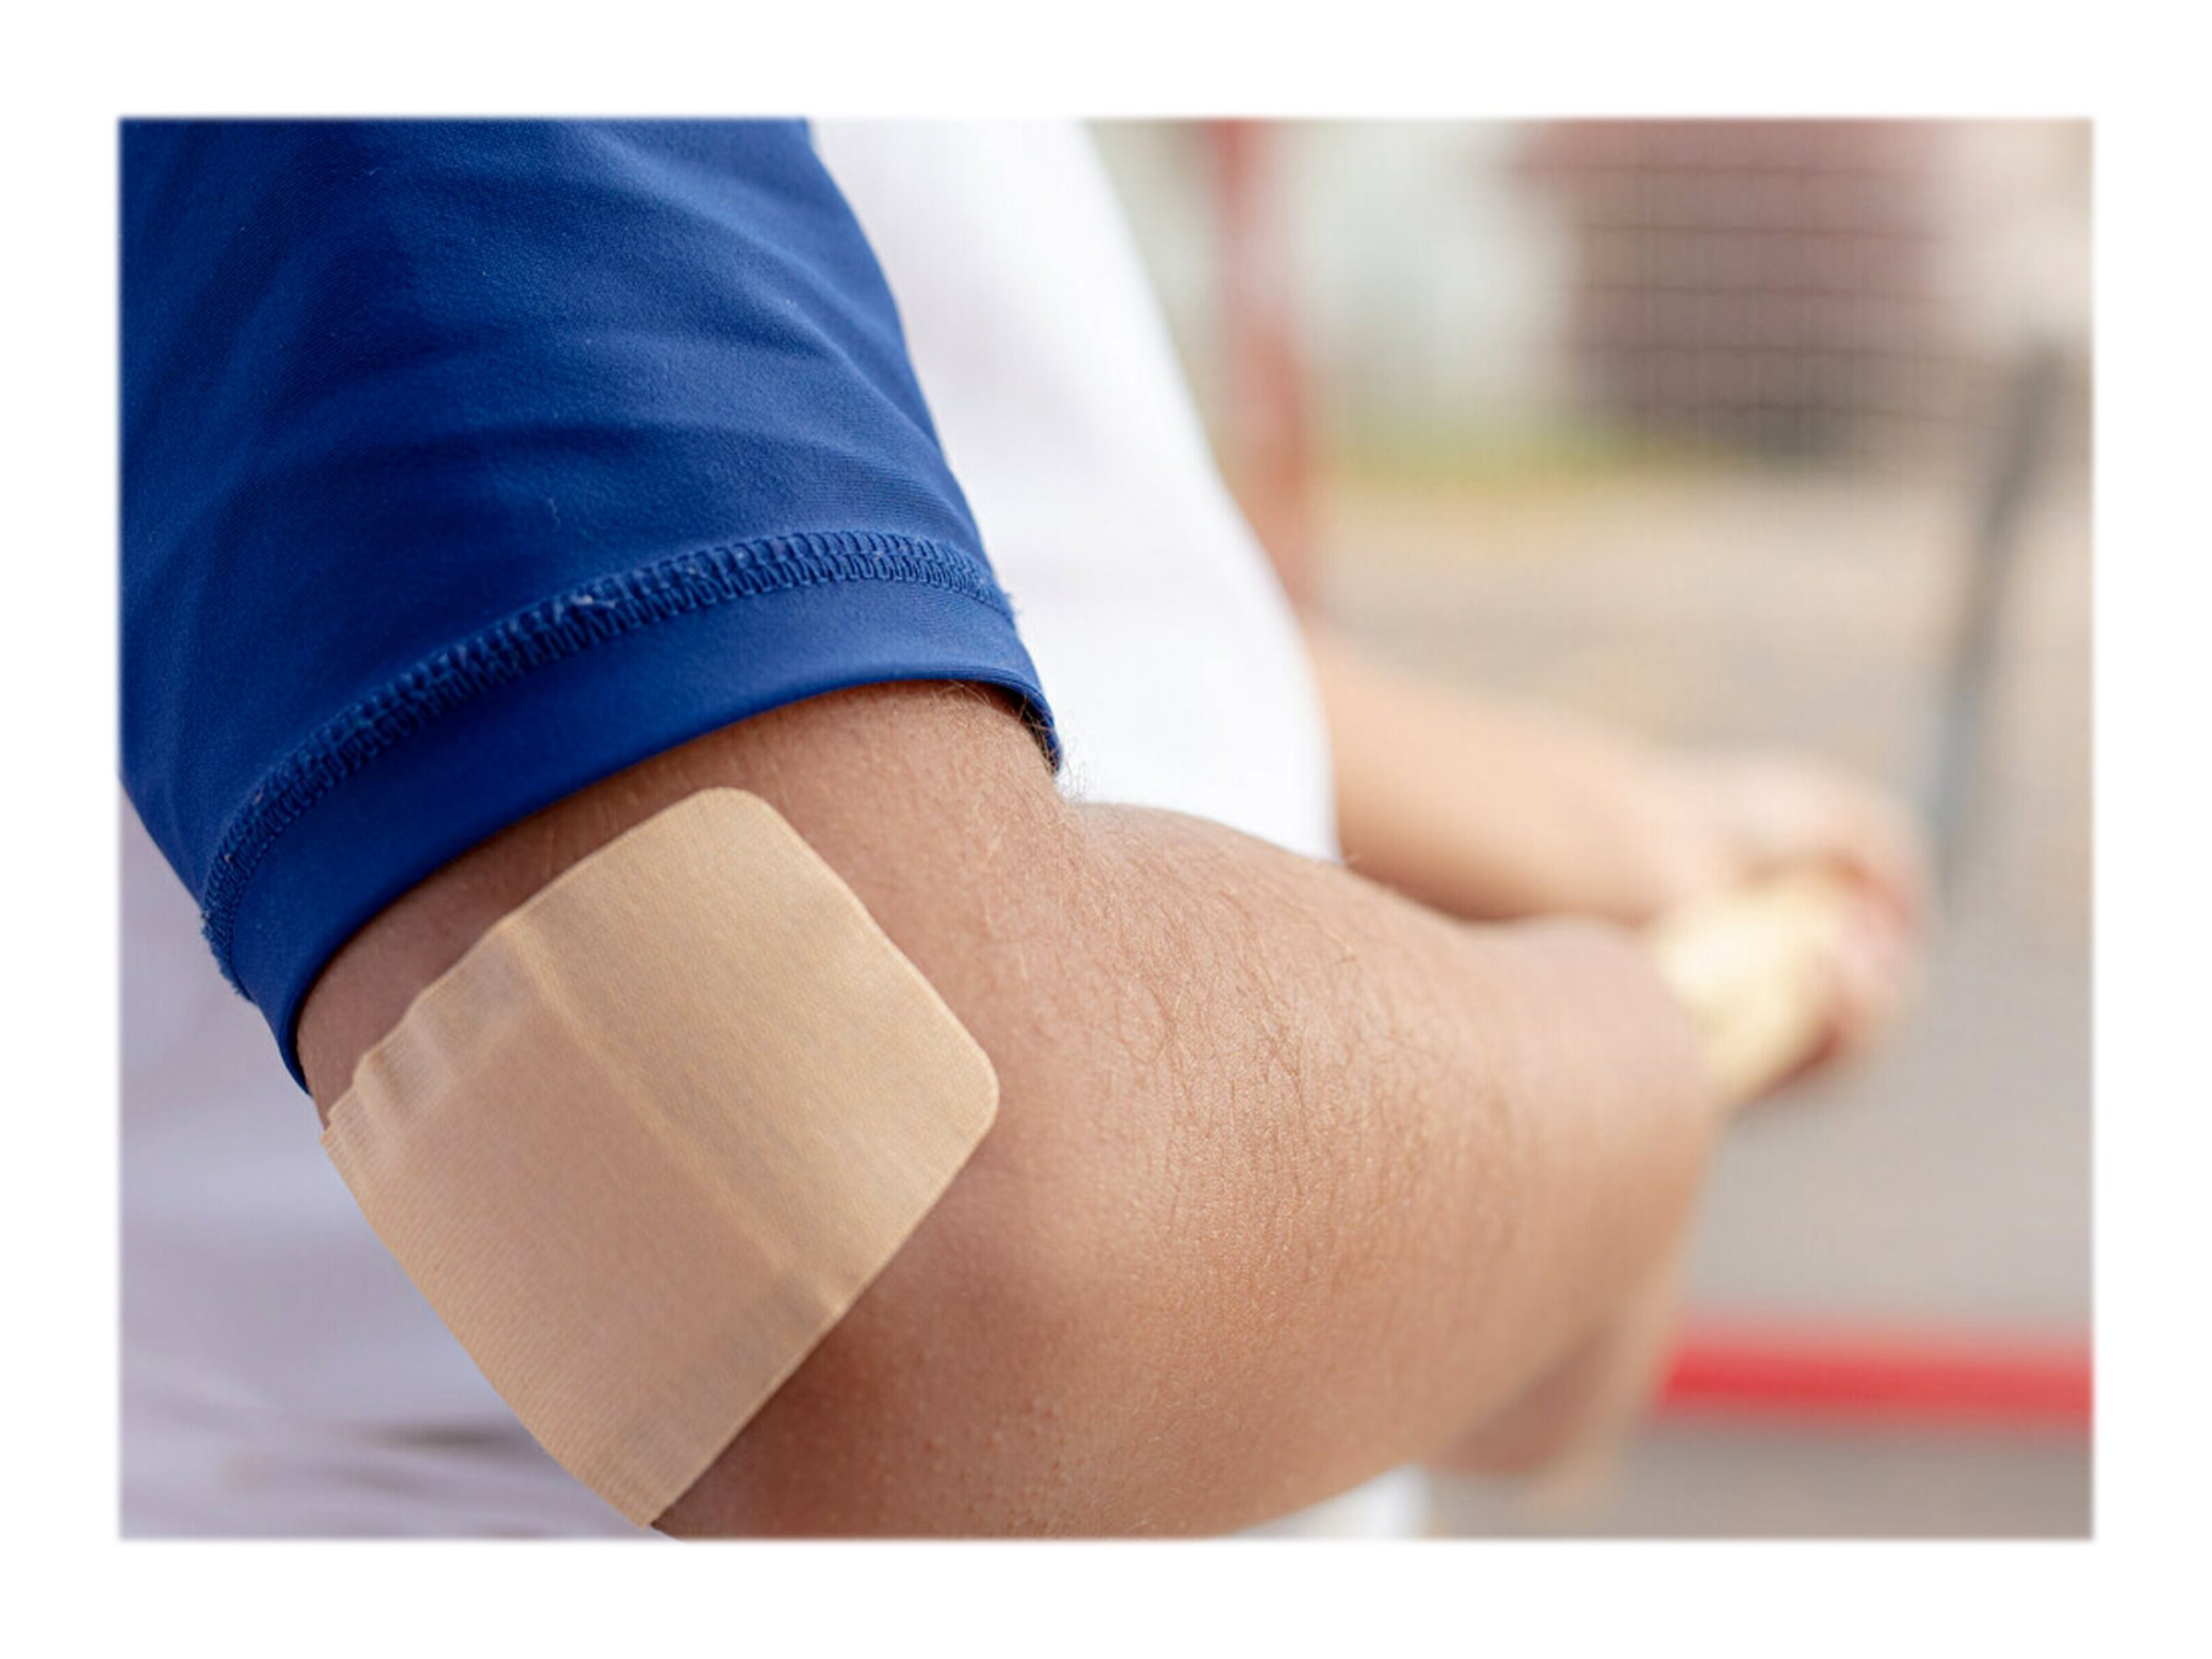 Nexcare Duo Knee and Elbow Bandages - One Size - 8's